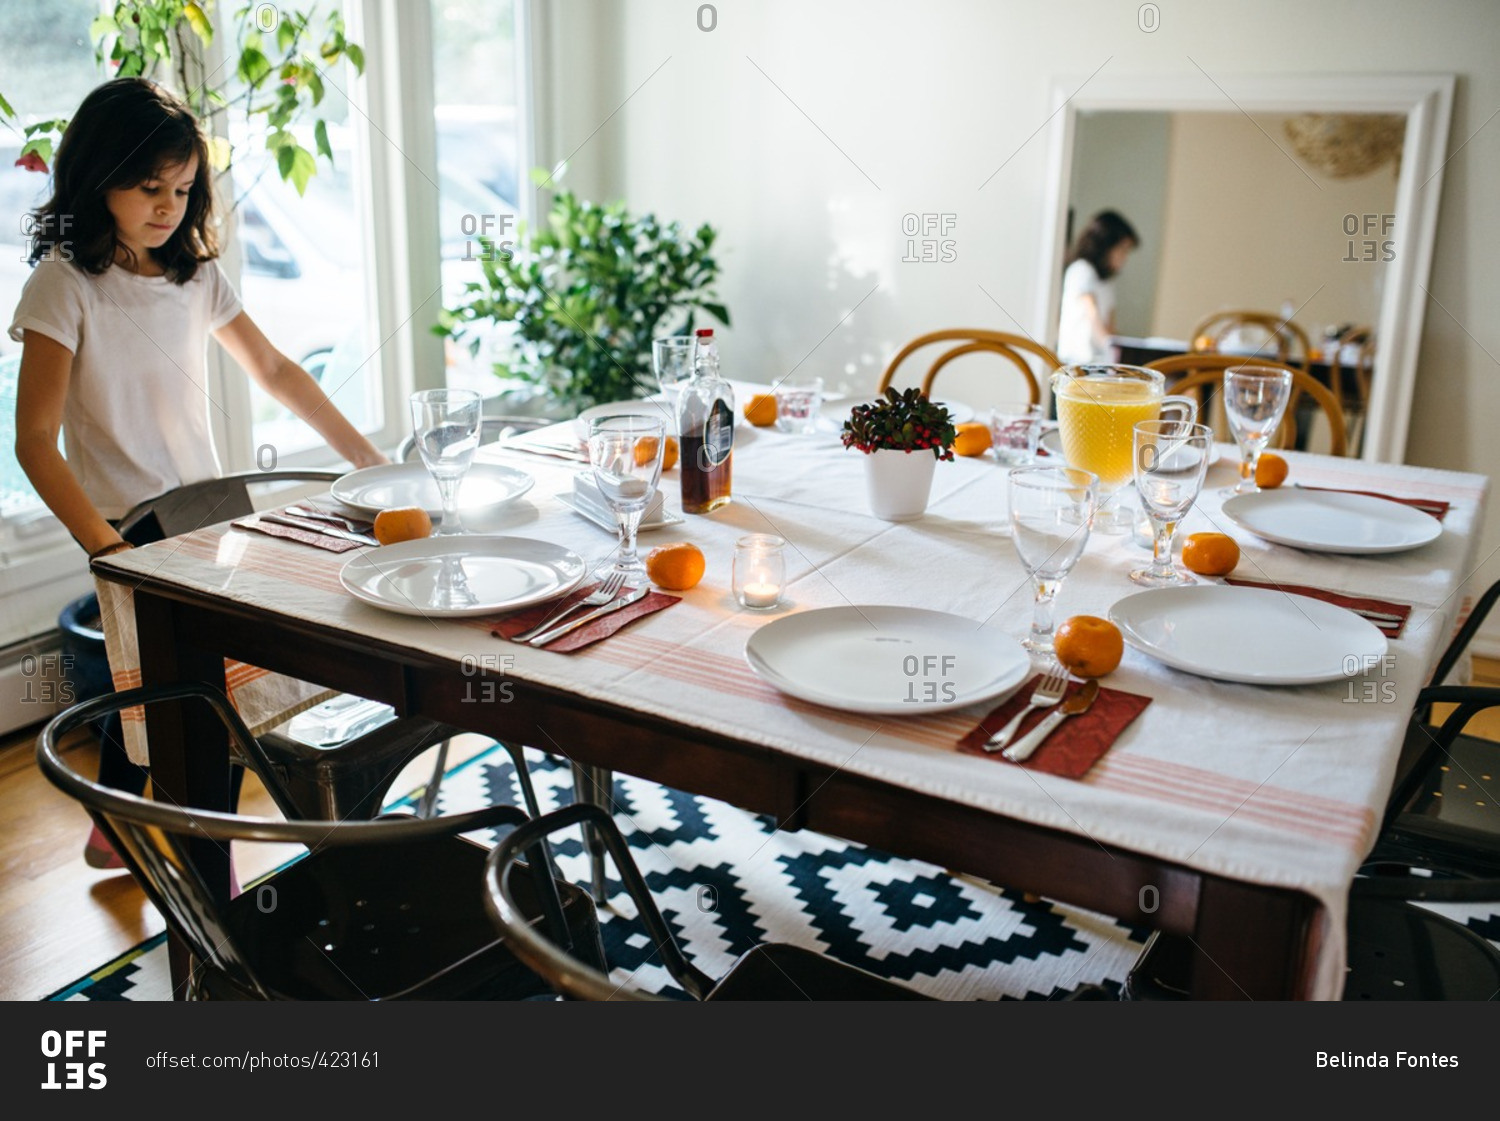 Girl at a dining table set for Christmas breakfast